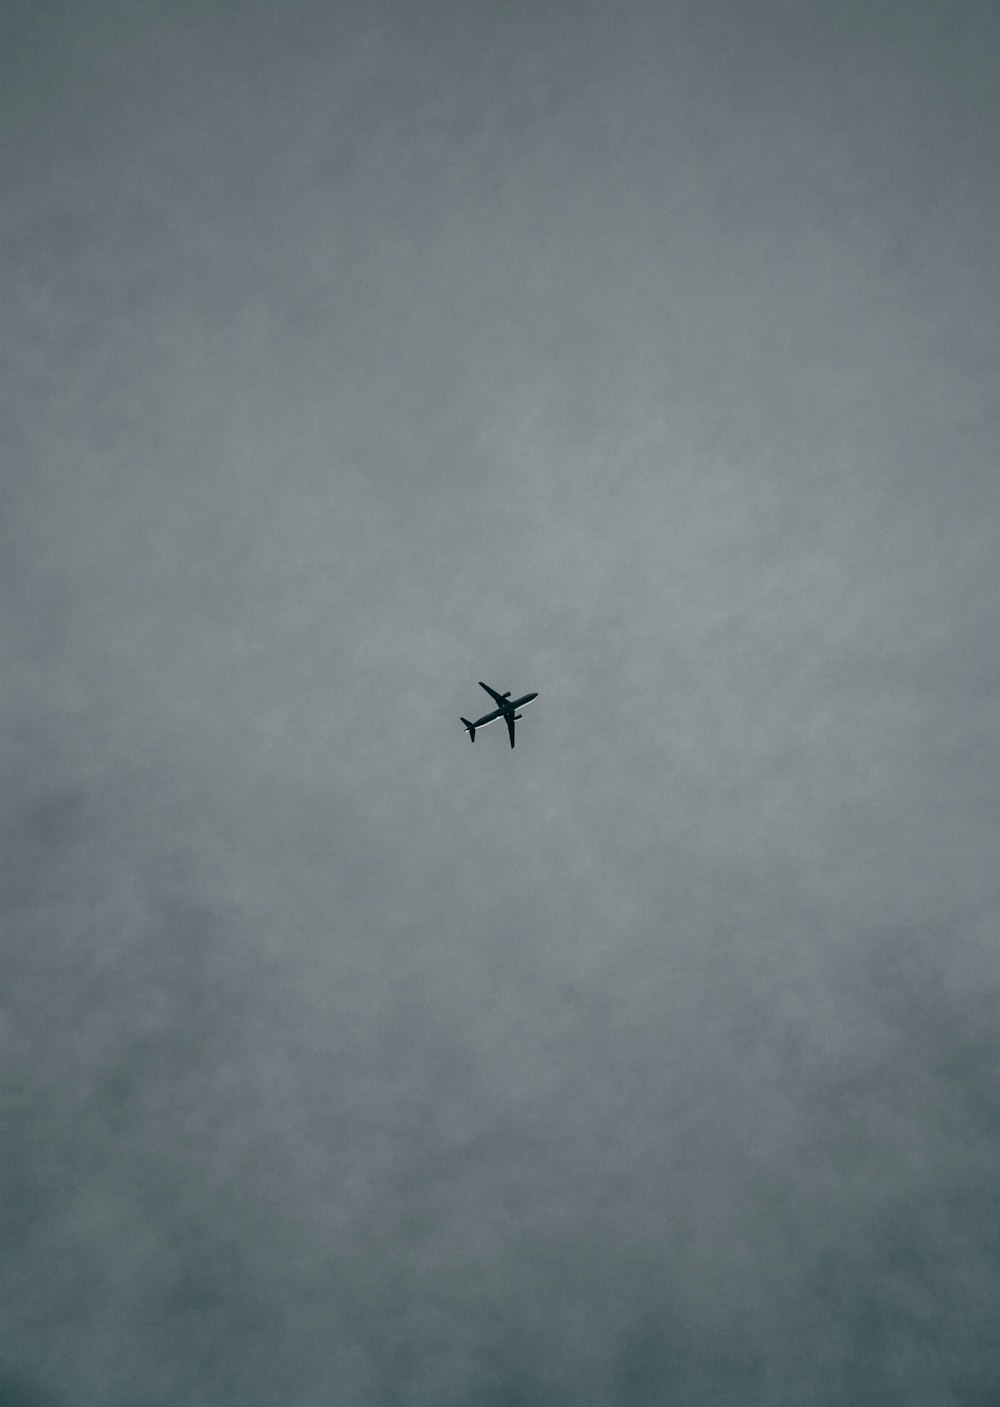 an airplane flying in the sky on a cloudy day